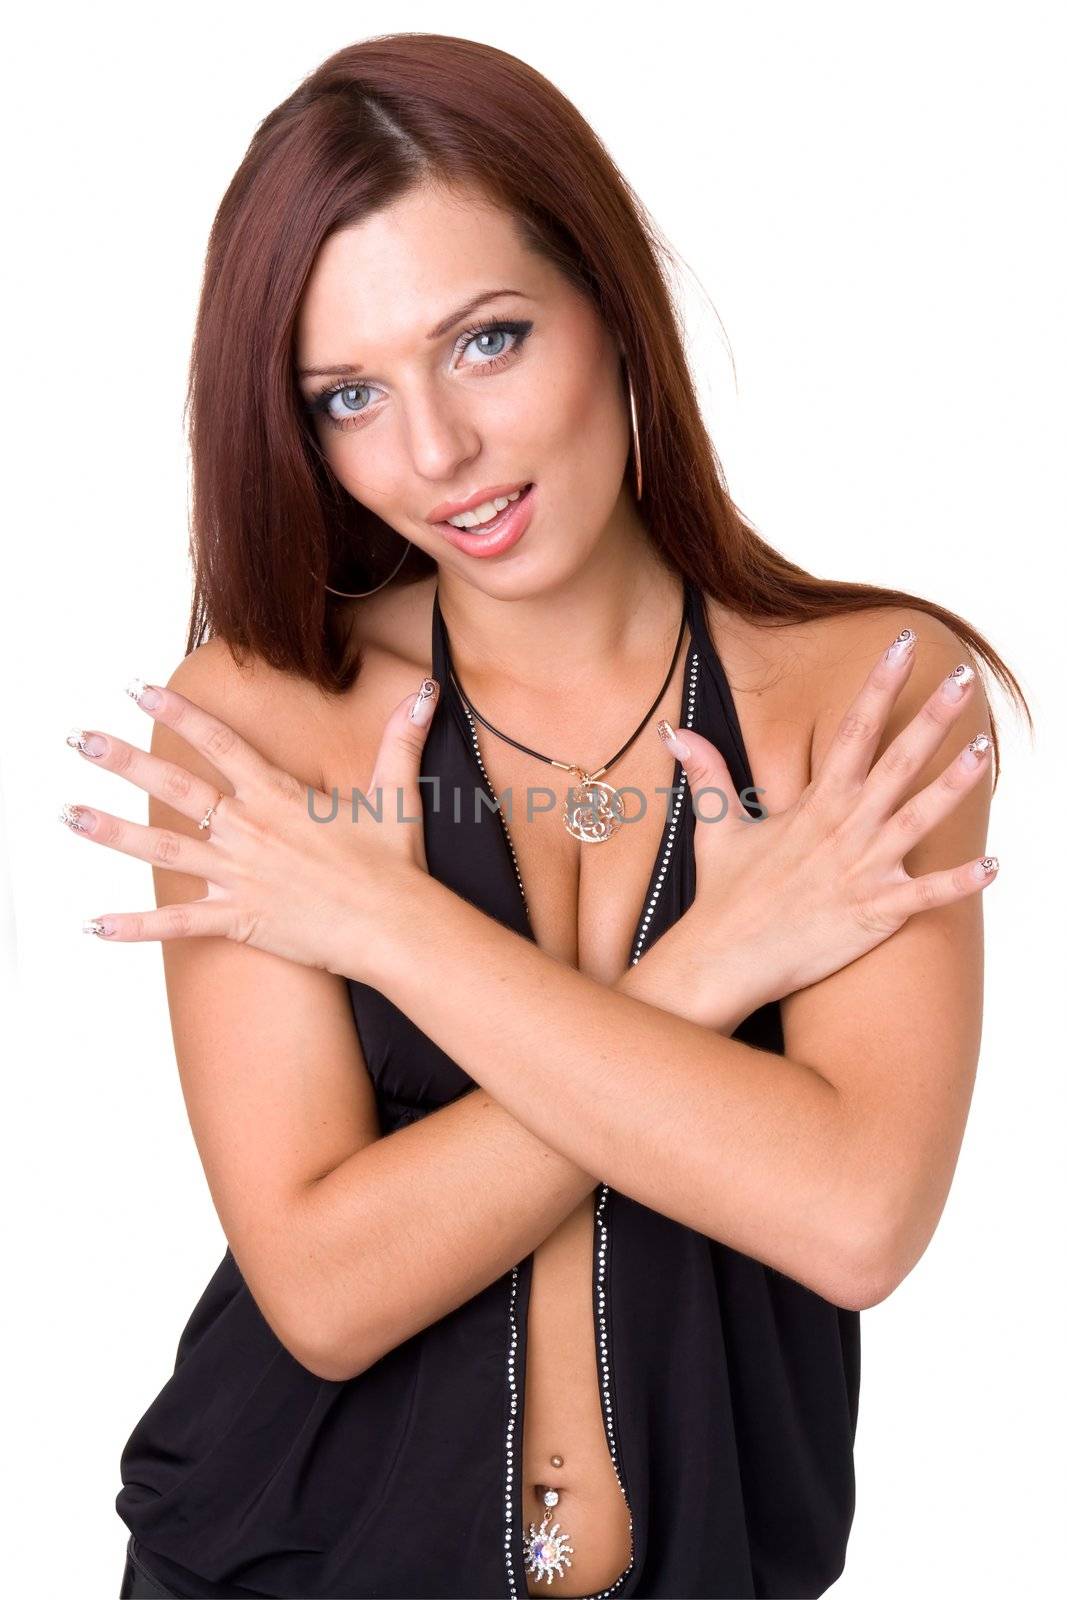 Sexy young woman on a white background